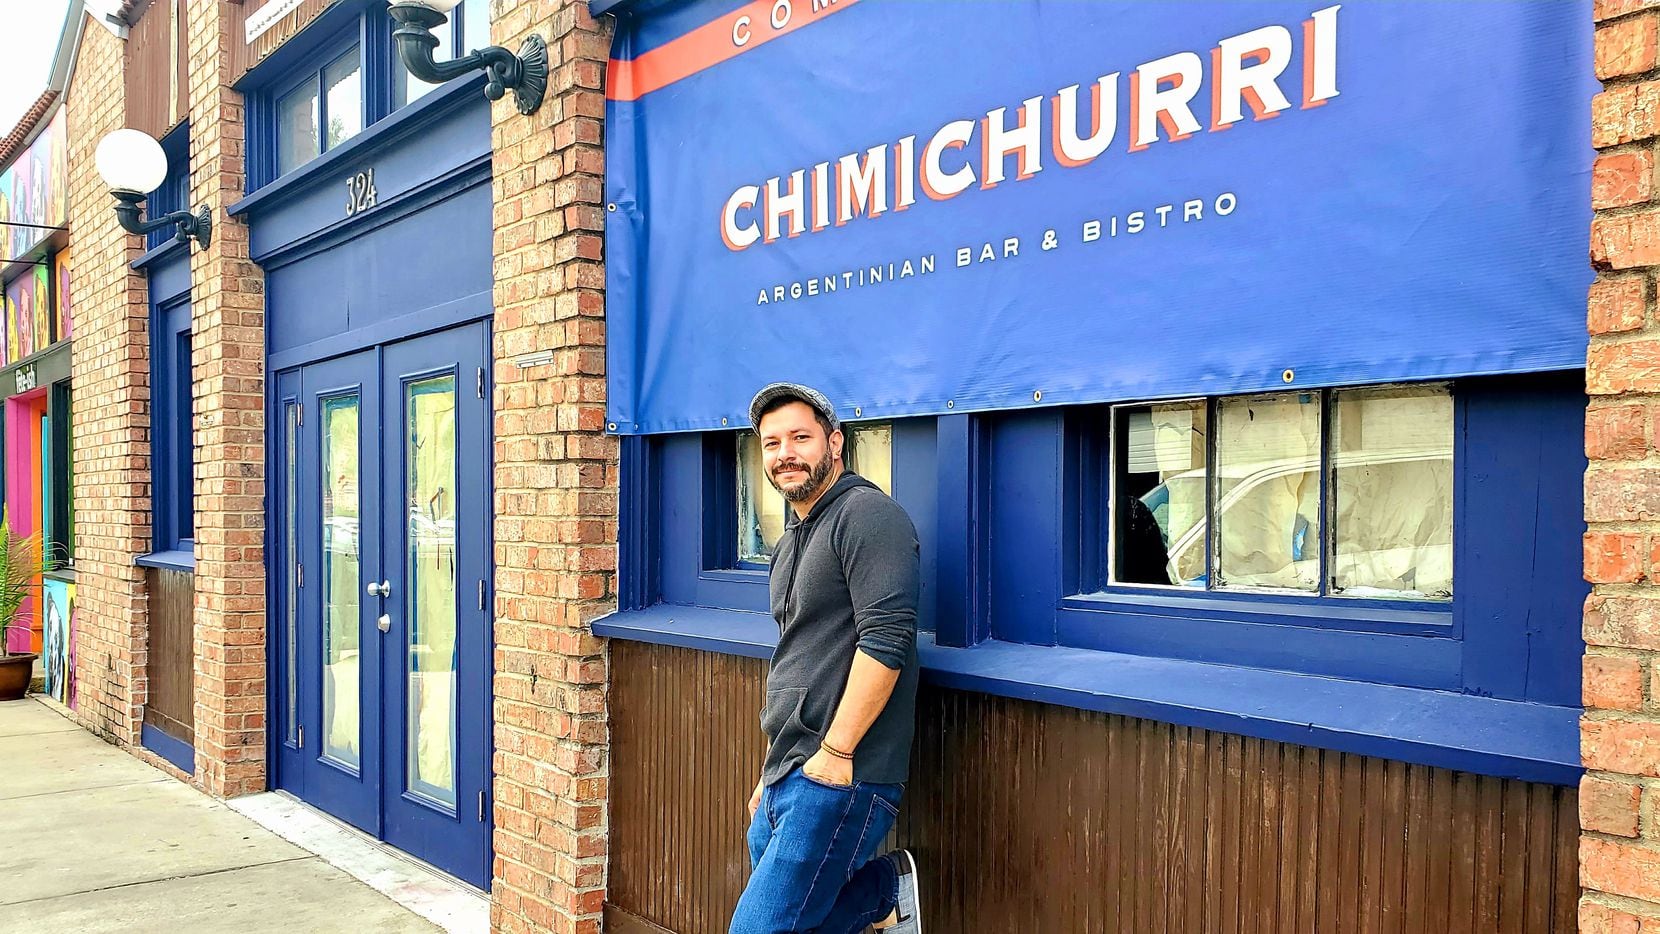 Bar manager James Slater at Chimichurri, which opened last fall in the Bishop Arts District